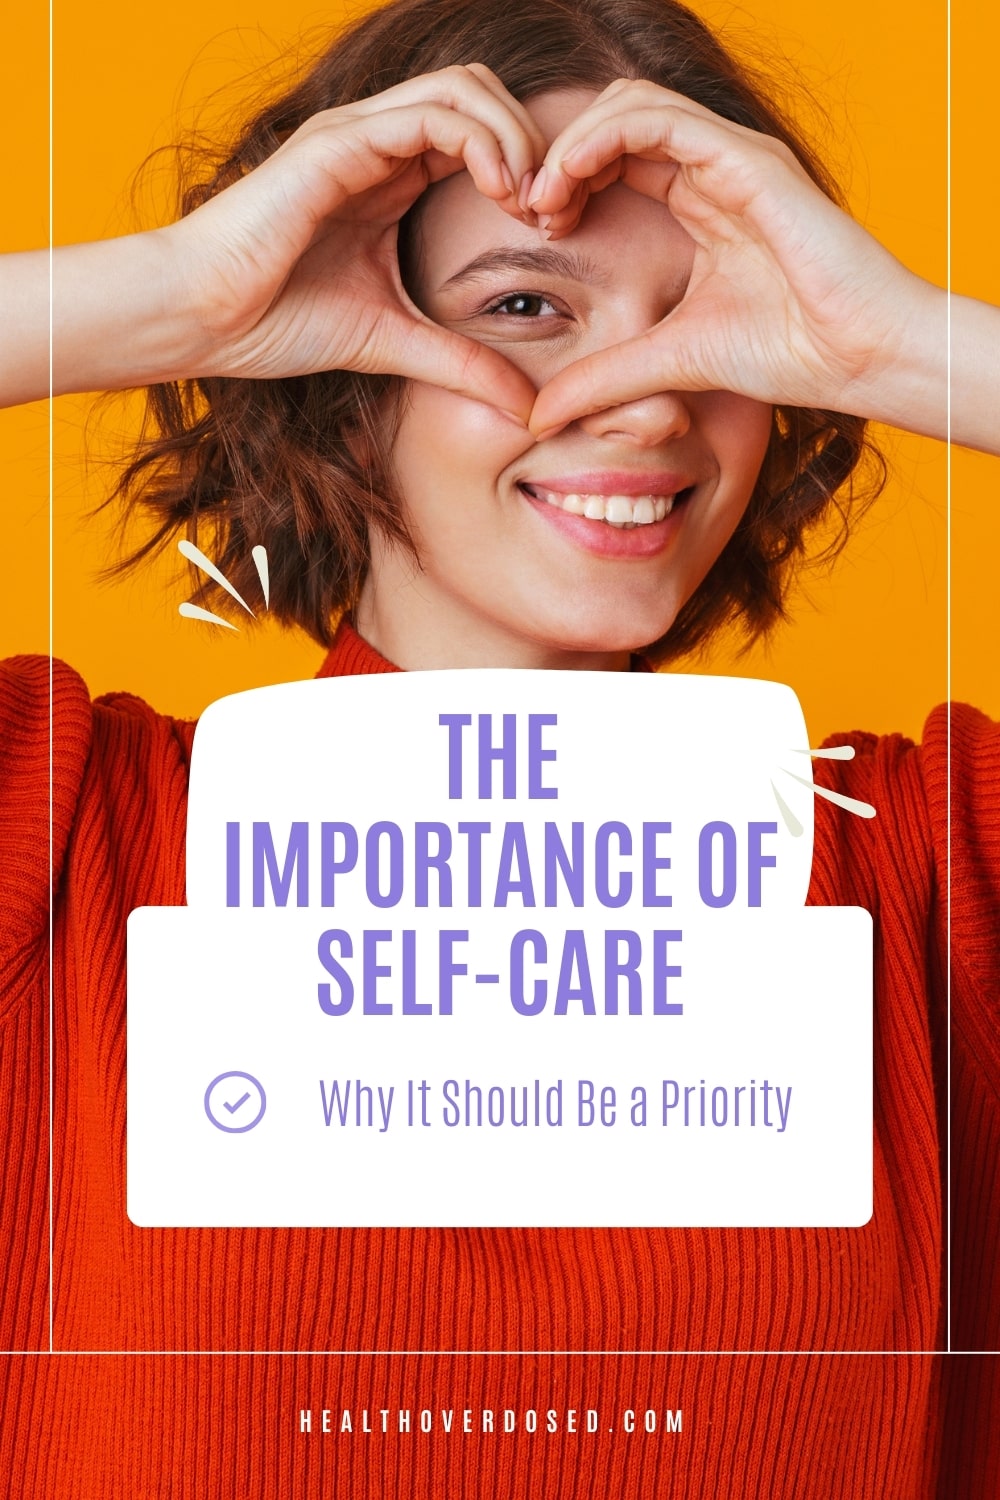 The Importance of Self-Care: Why It Should Be a Priority